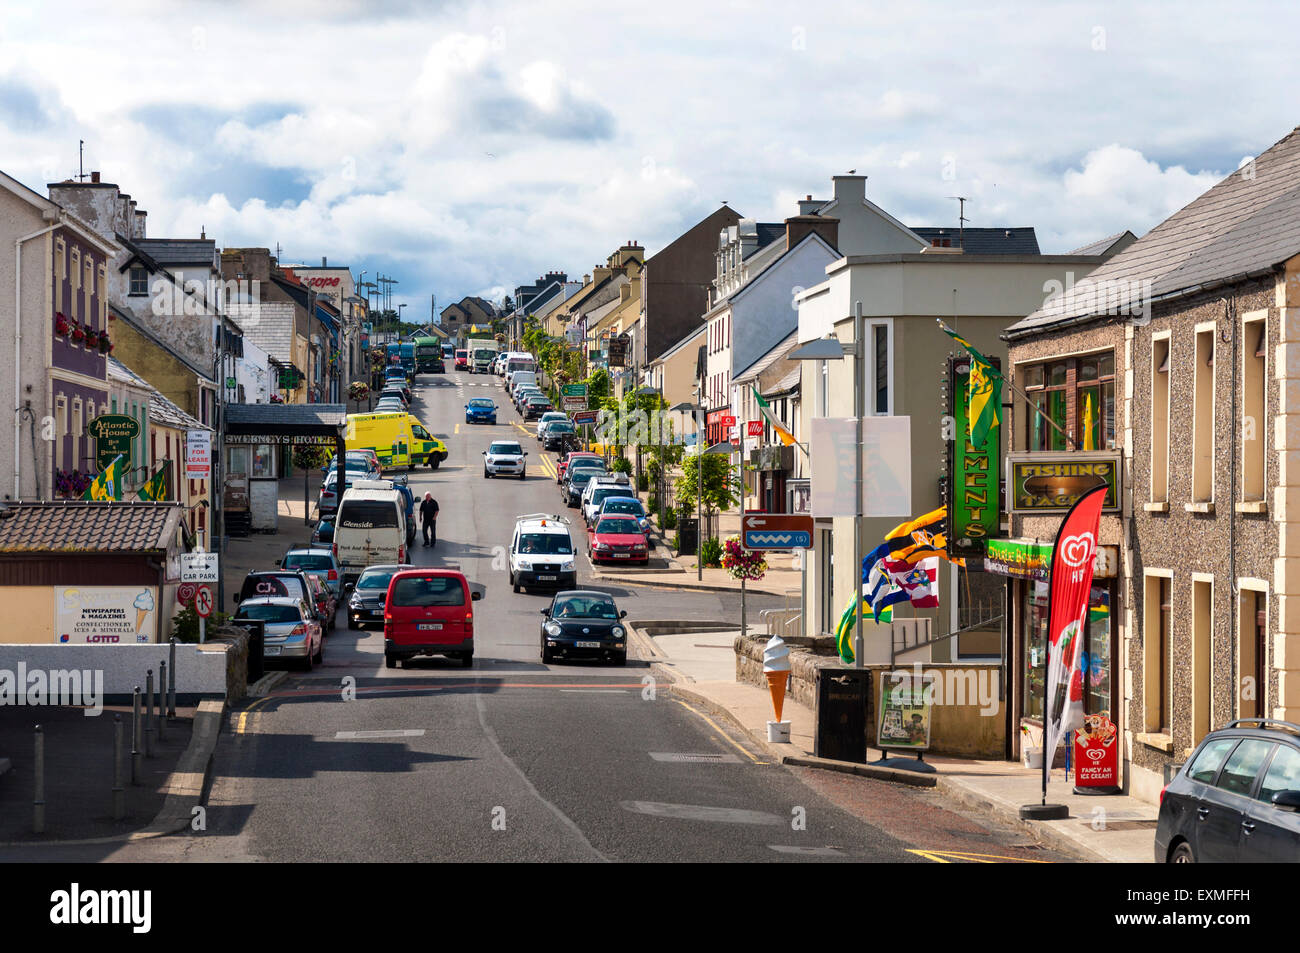 An Clochán Liath, Dungloe or Dunglow in English, is a Gaeltacht town in County Donegal, Ireland. Stock Photo